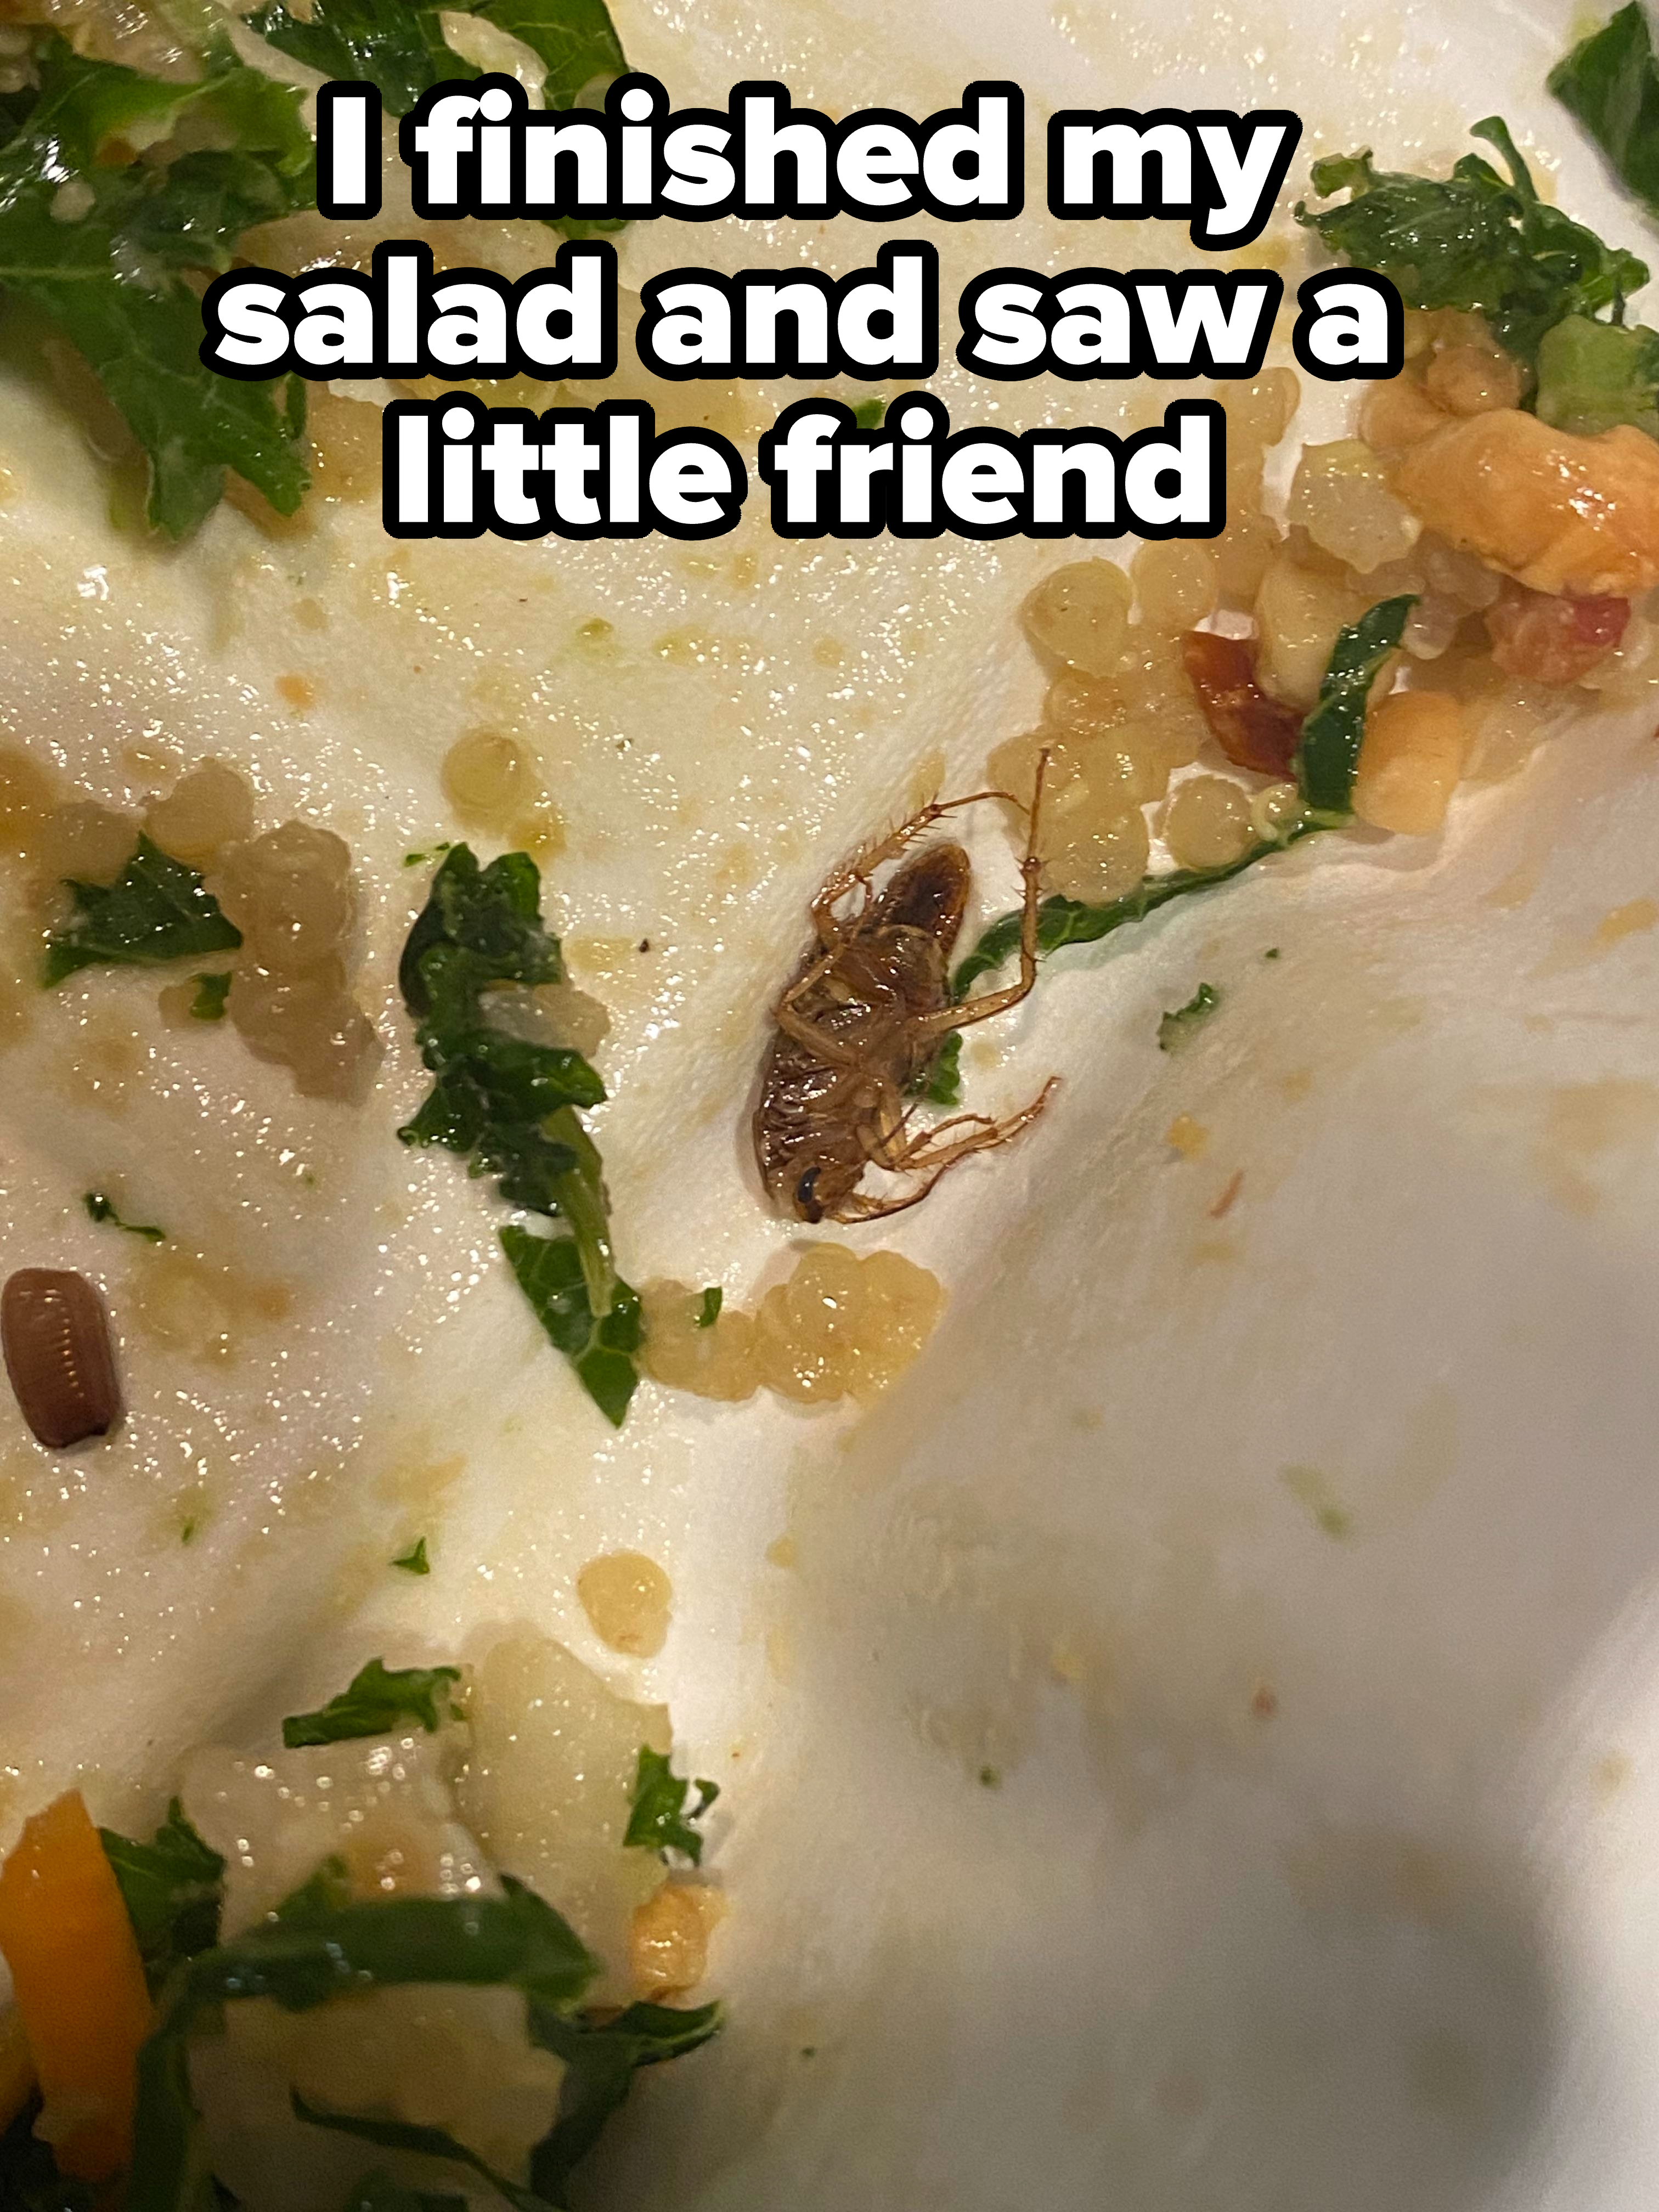 A dead cockroach amid the dregs of someone&#x27;s salad